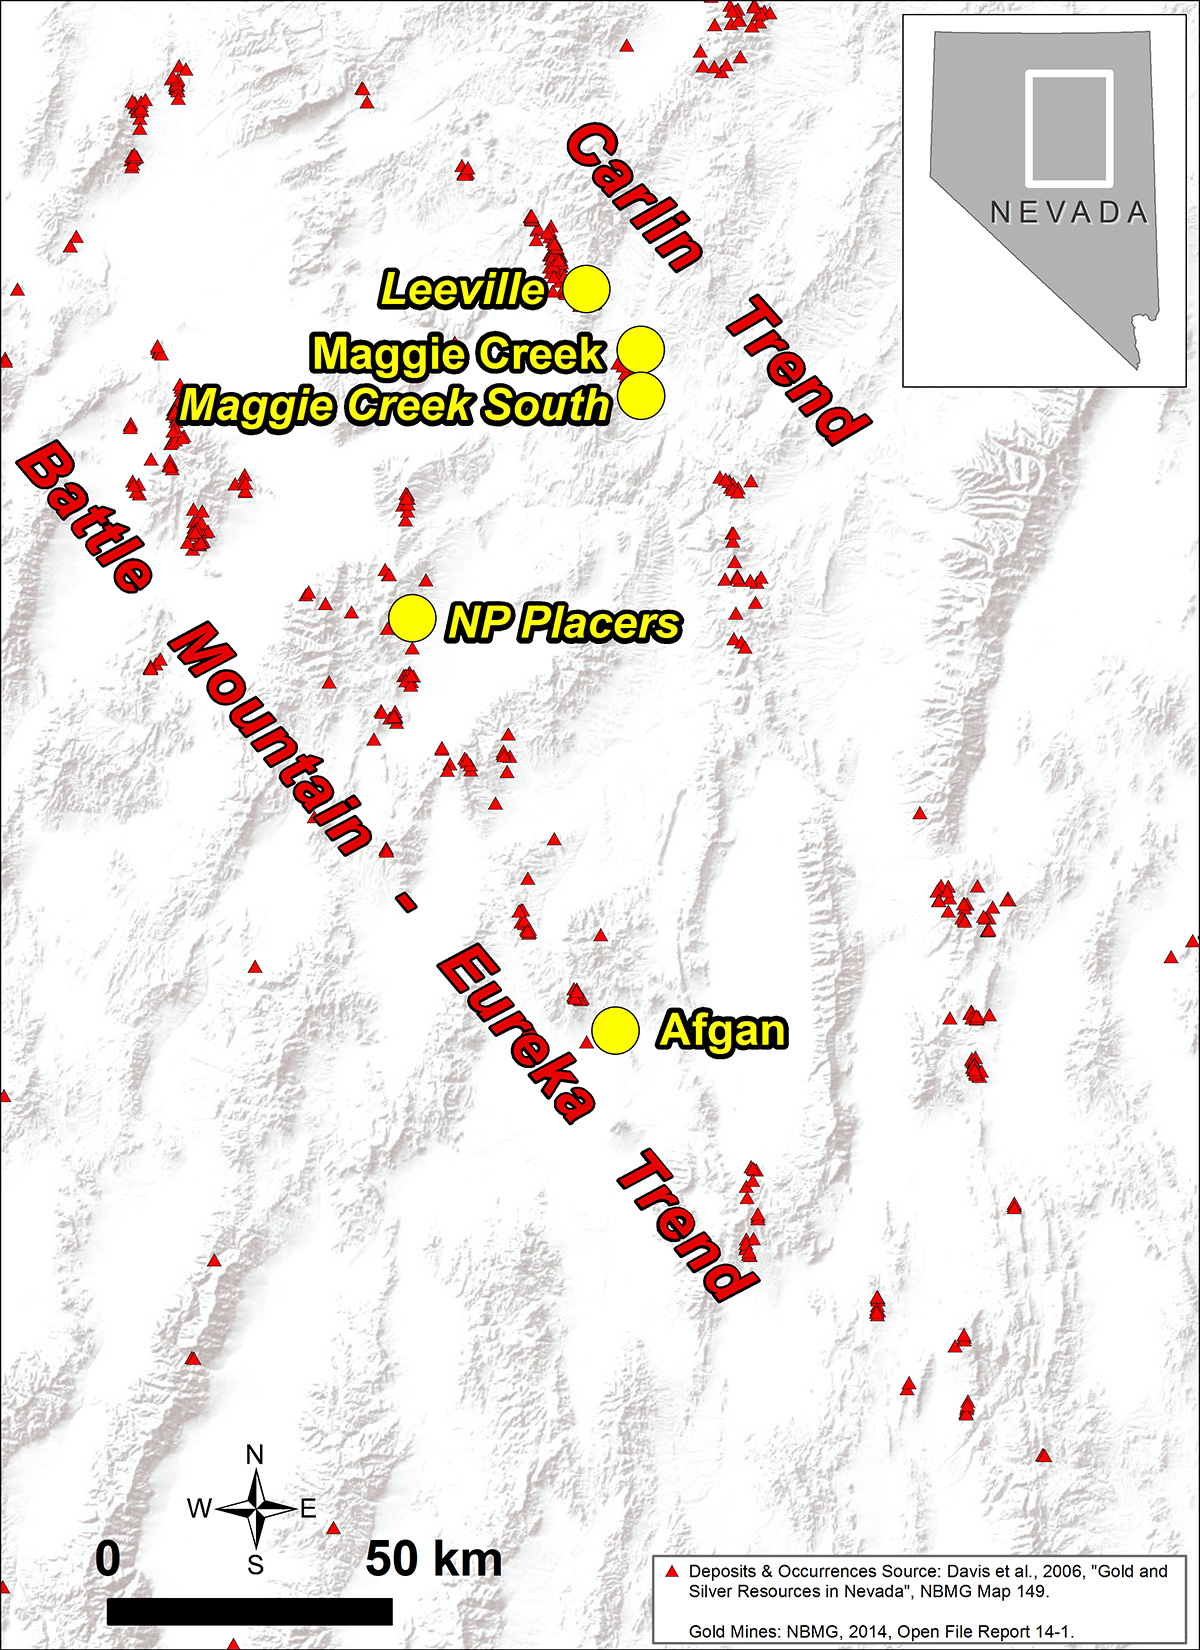 Location of Nevada Royalties (Gold Bar South is marked as Afgan)